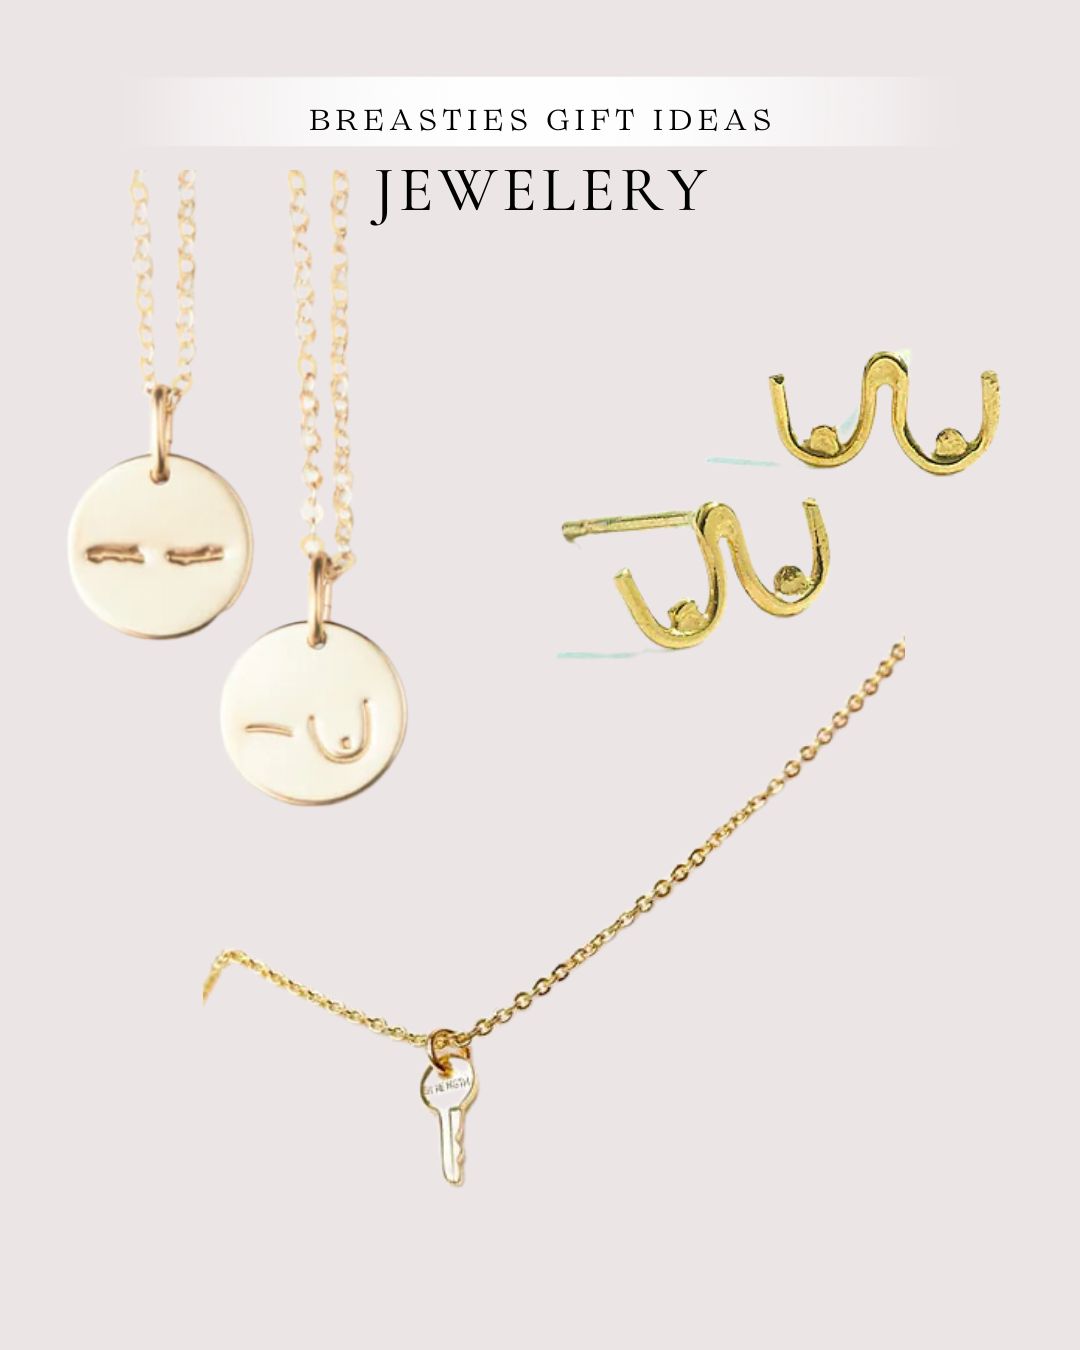 Meaningful Jewelry gifts